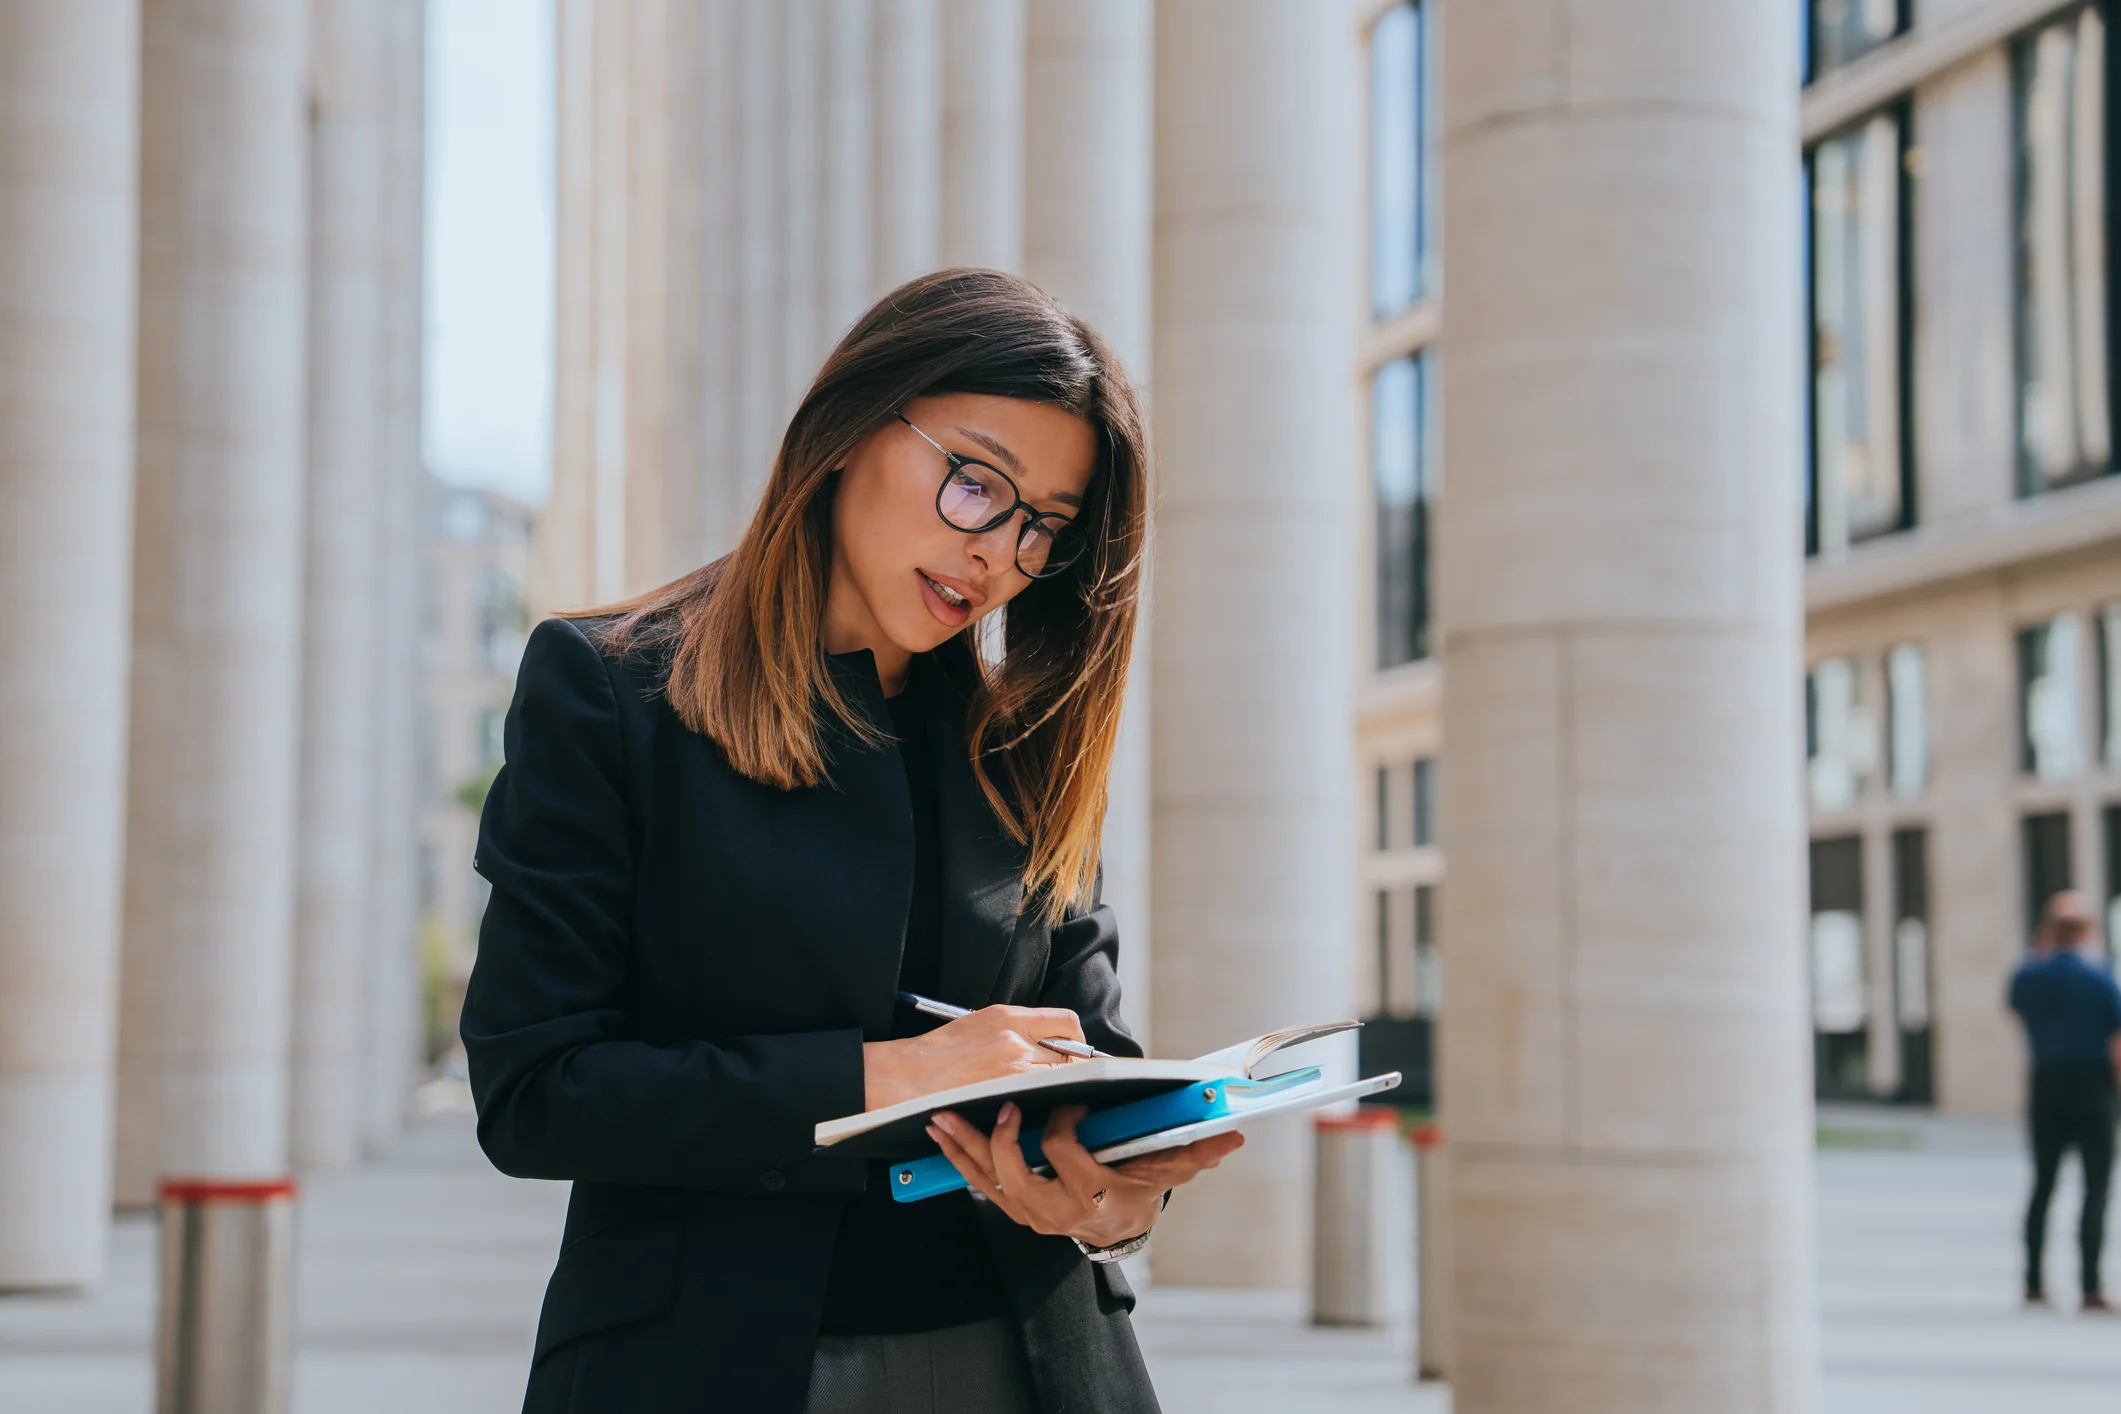 Read about: Young Adult Businesswoman In Black Jacket Writing In Notebook Stands Outside At Huge Building, Successful Female Lawyer Makes Note At Court Building, Prepares For Meeting With Client.